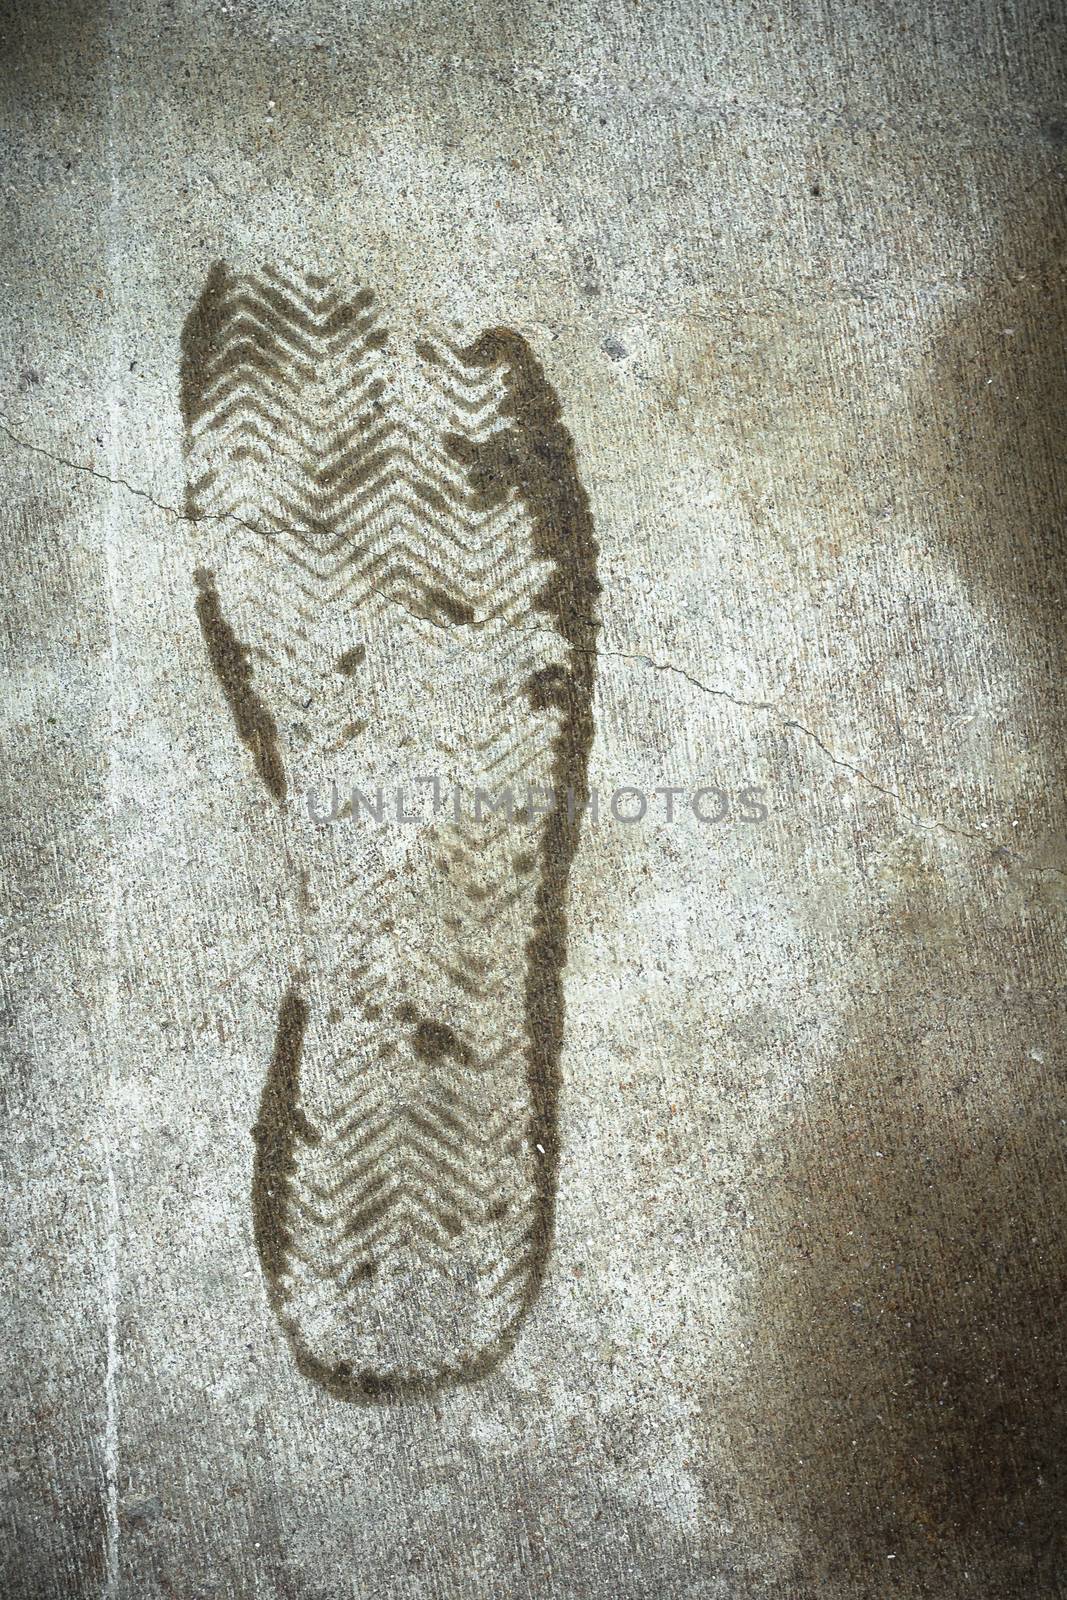 An imprint of a shoe wet on the road.